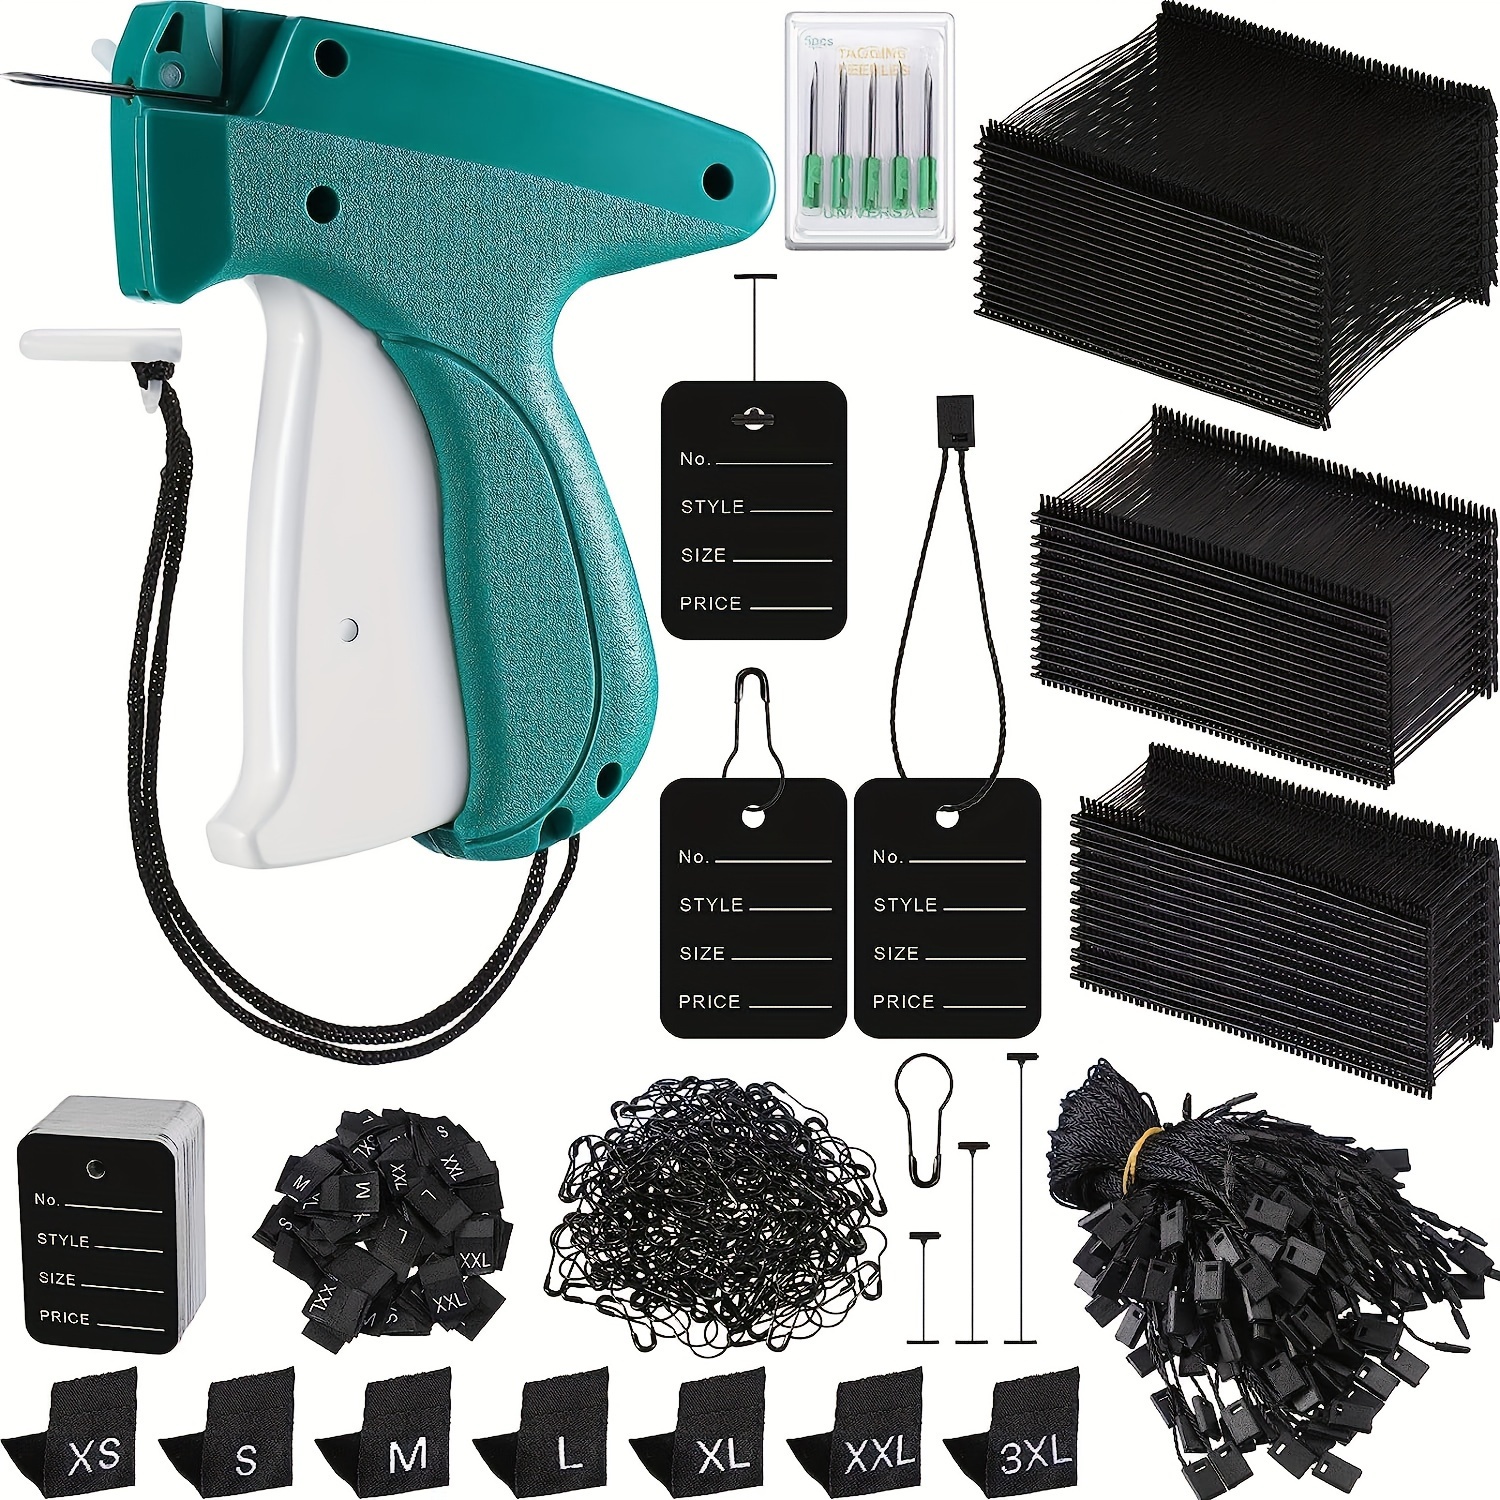 Tag Gun Kit - Includes 1 Needle, 500 Black And 500 White Fasteners, Great  For Securing Comforters, Hemming Curtains, Linen Quick Fixes, Etc